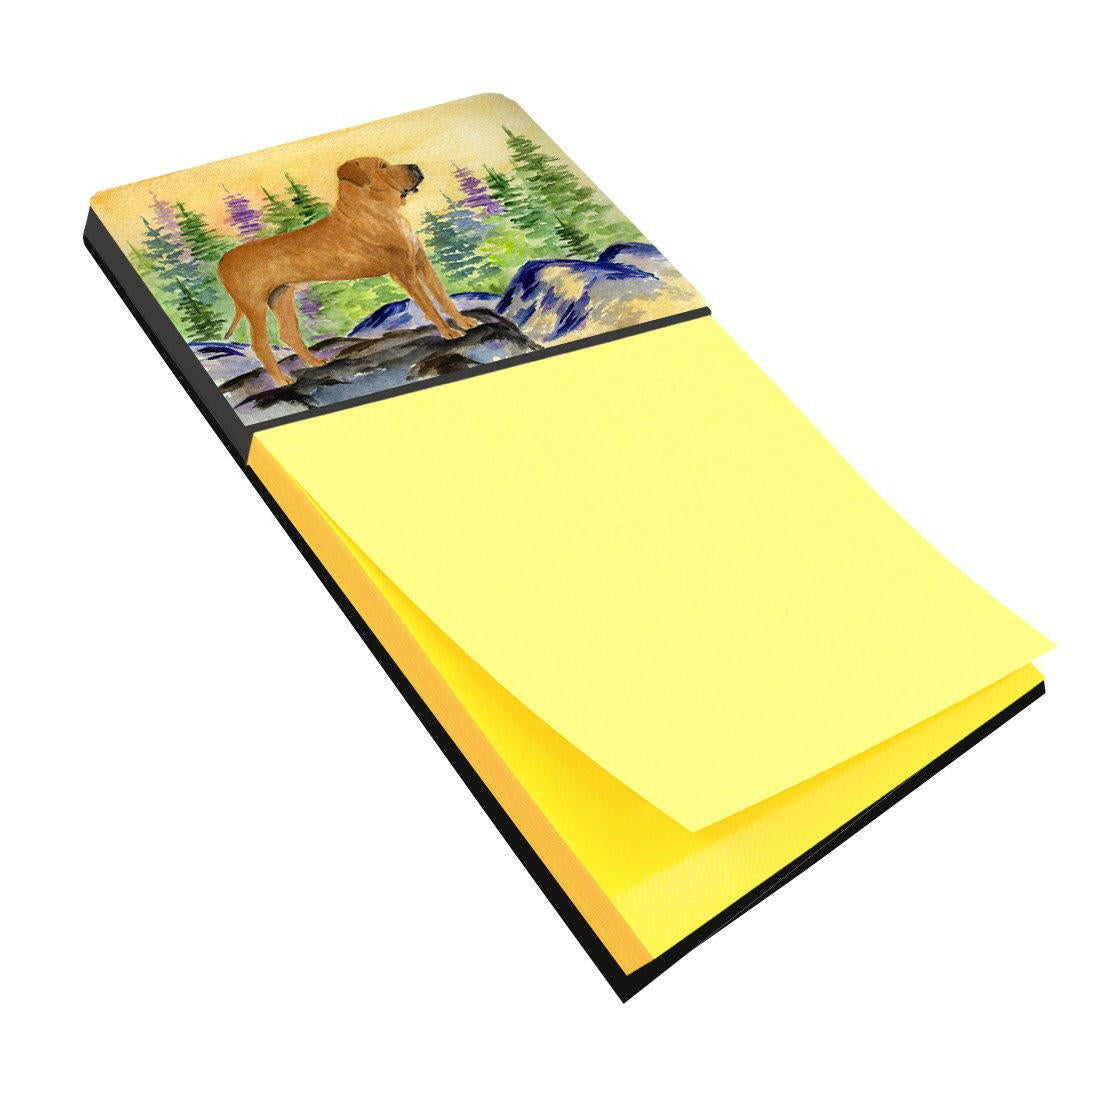 Tosa Inu Refiillable Sticky Note Holder or Postit Note Dispenser SS8195SN by Caroline's Treasures